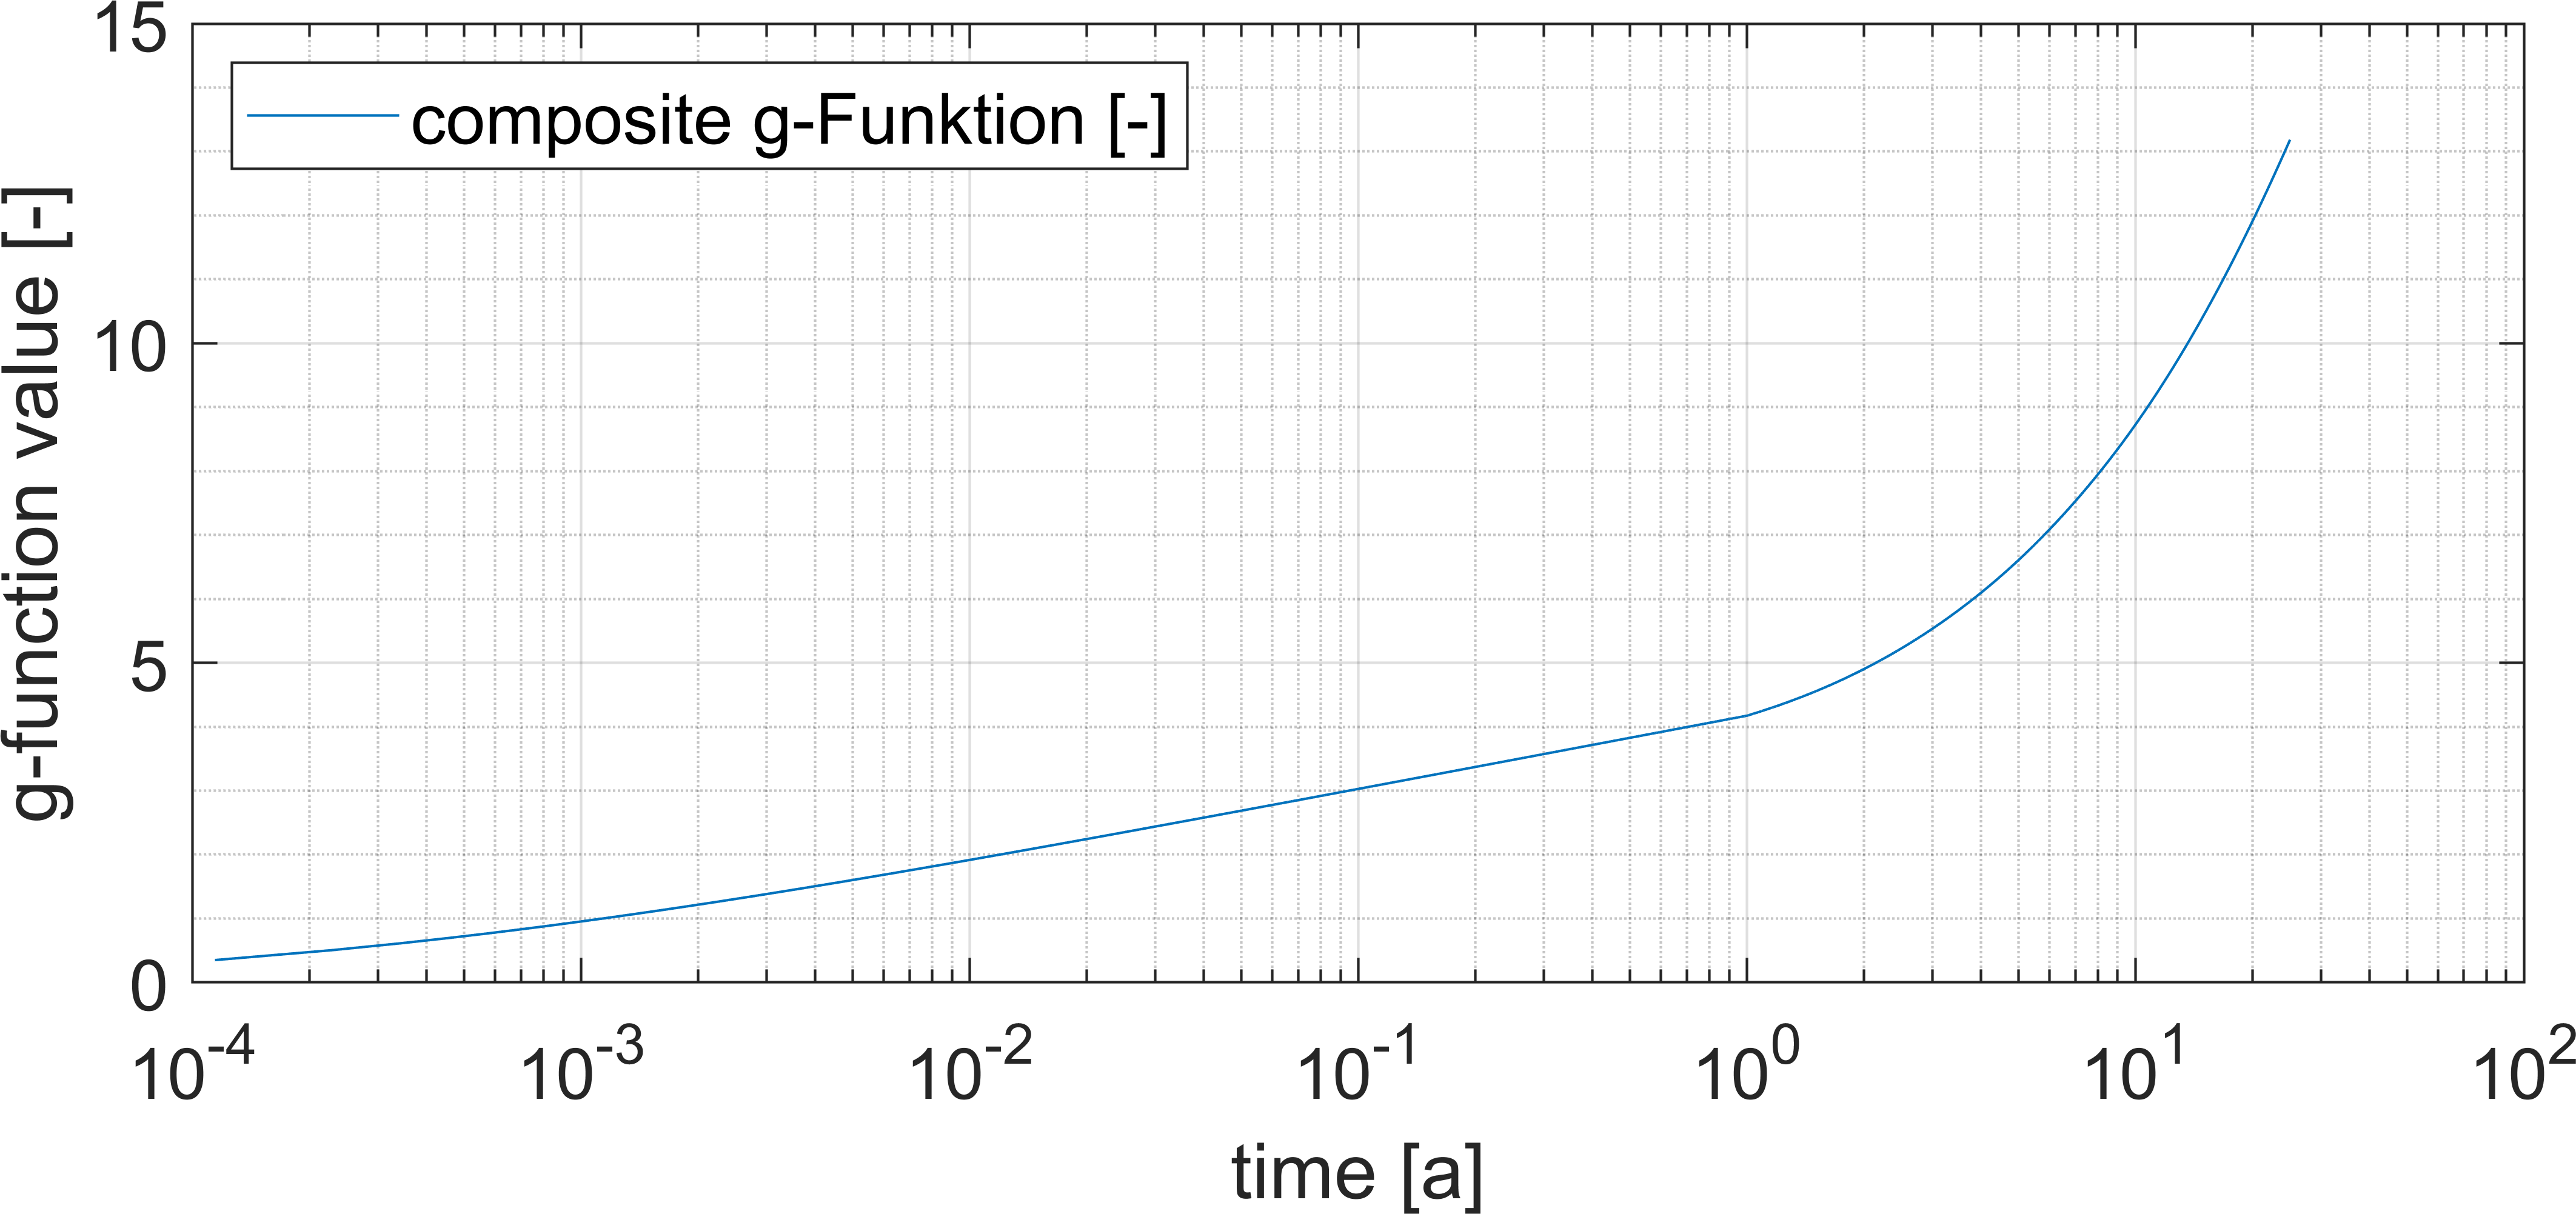 composed g-function